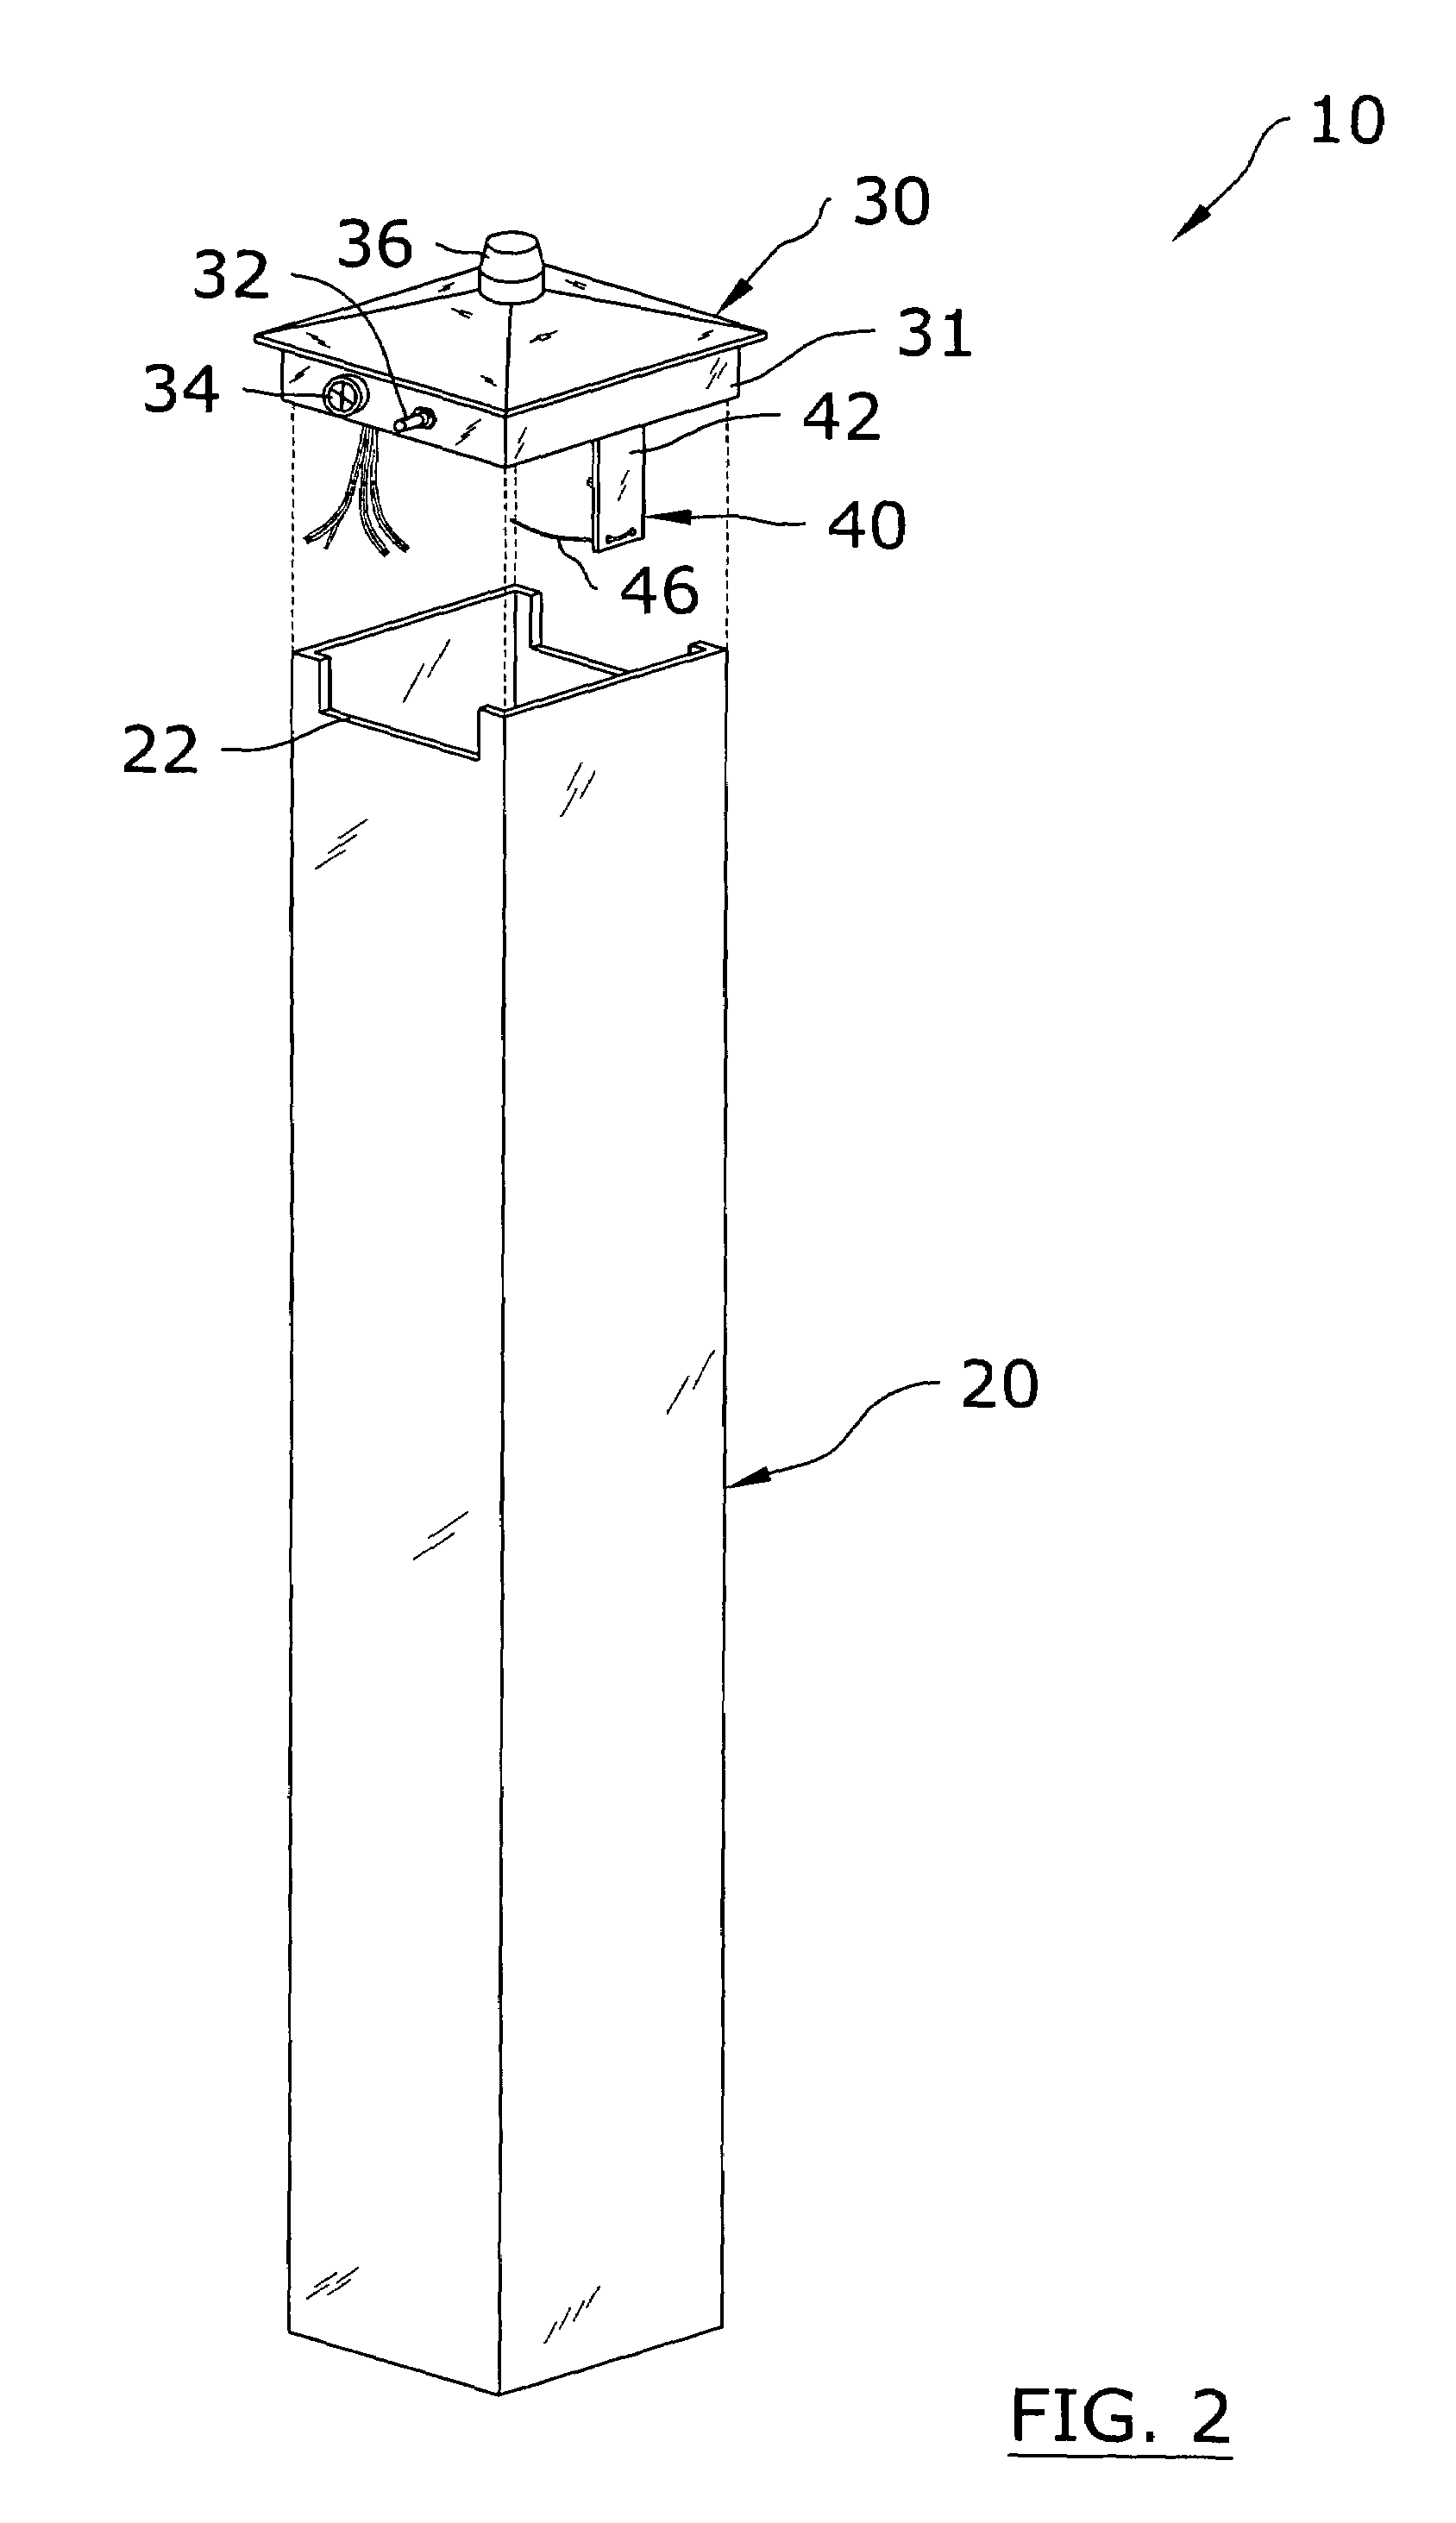 Electrical enclosure system